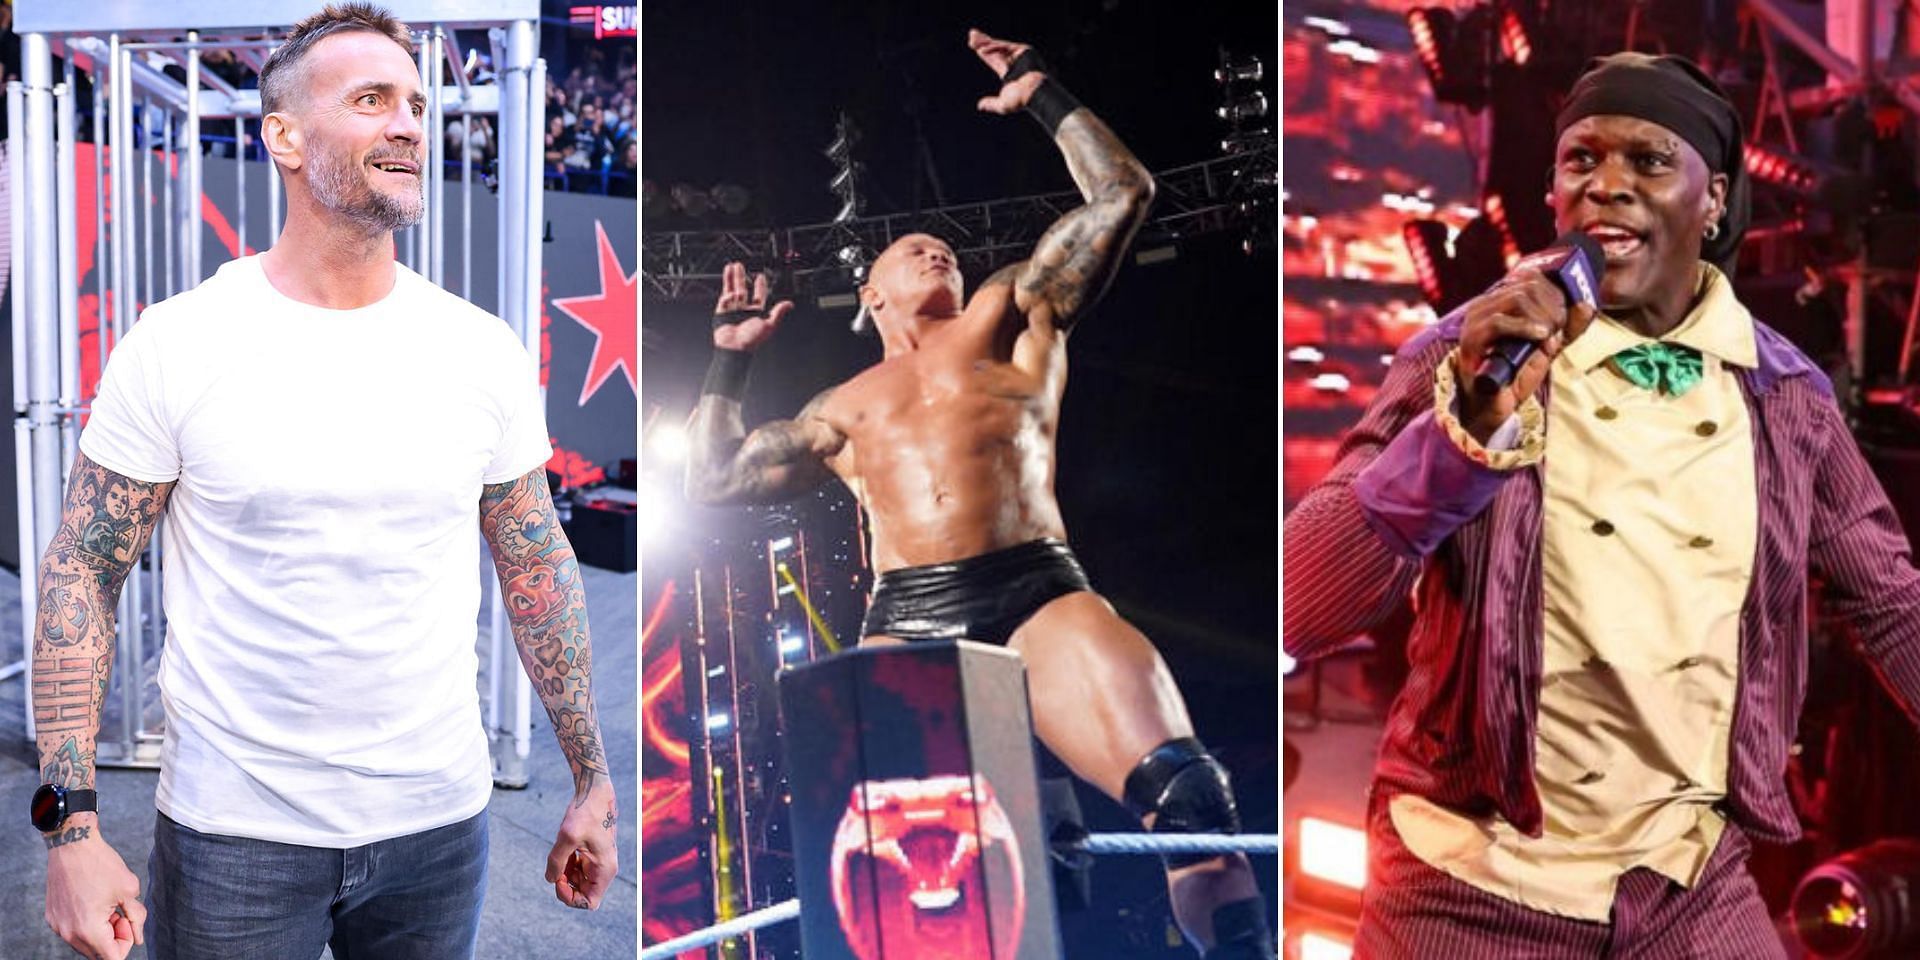 Randy Orton, CM Punk and R-Truth returned to WWE recently